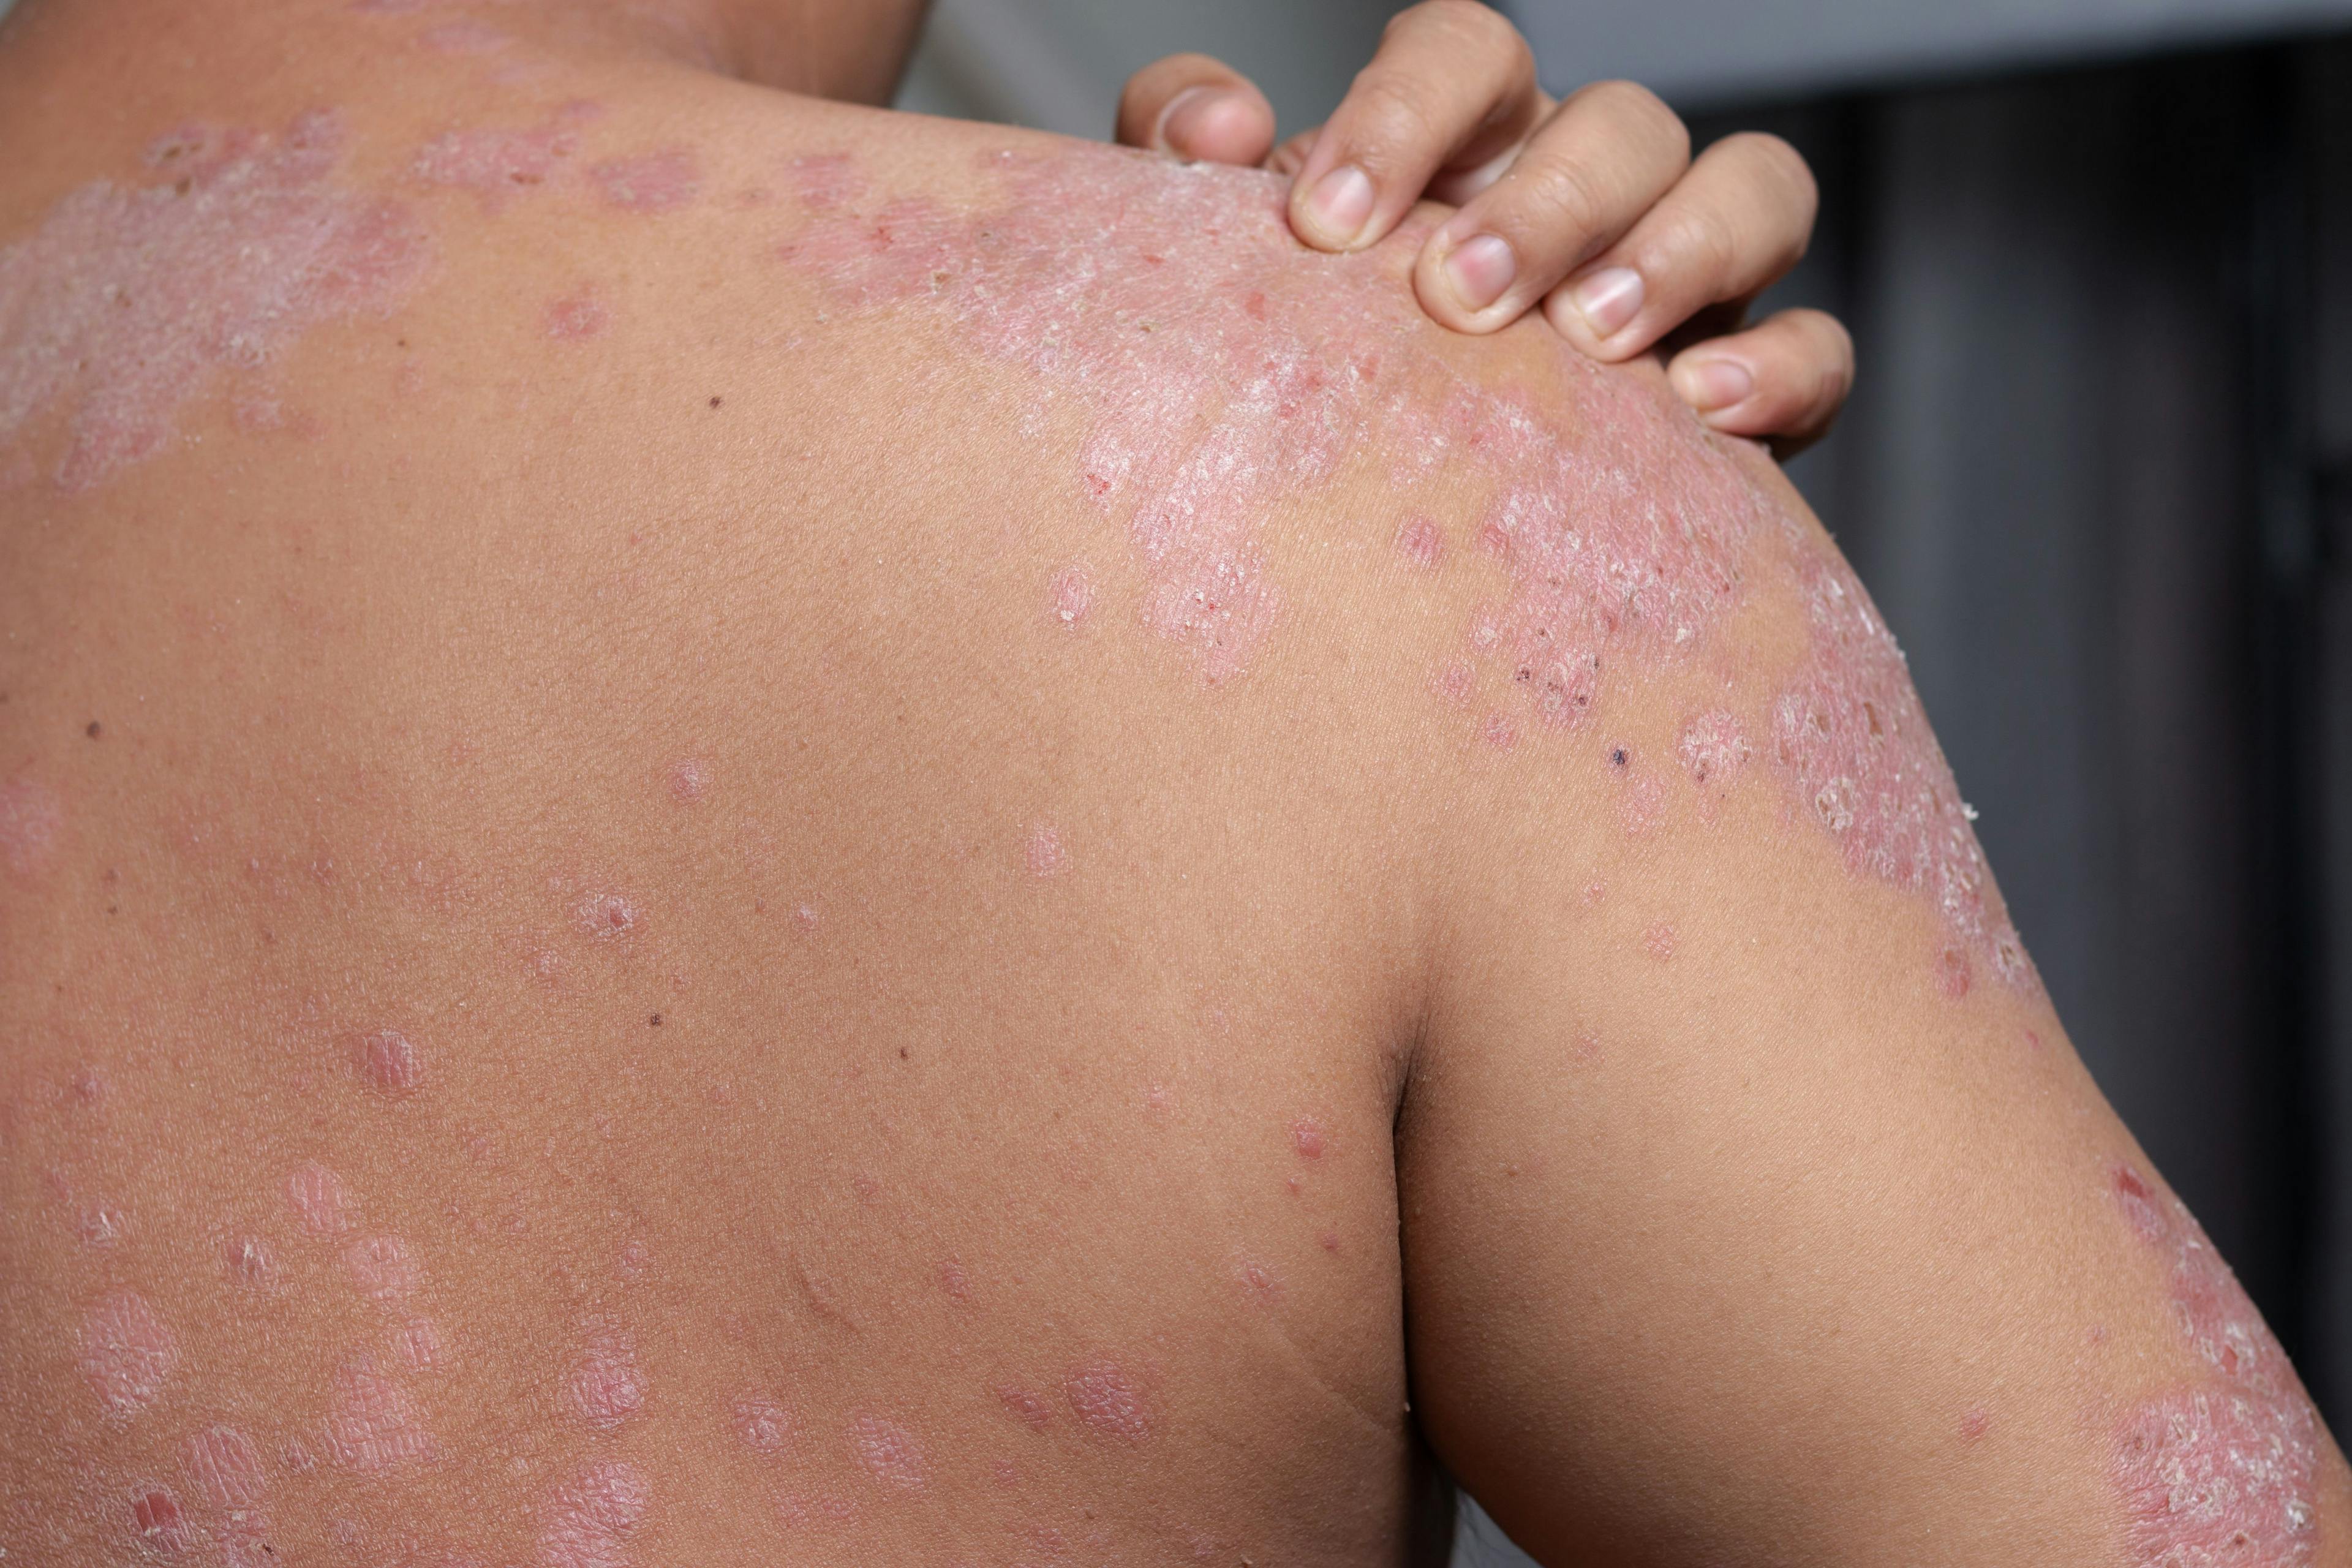 Man with psoriasis on the shoulder and back